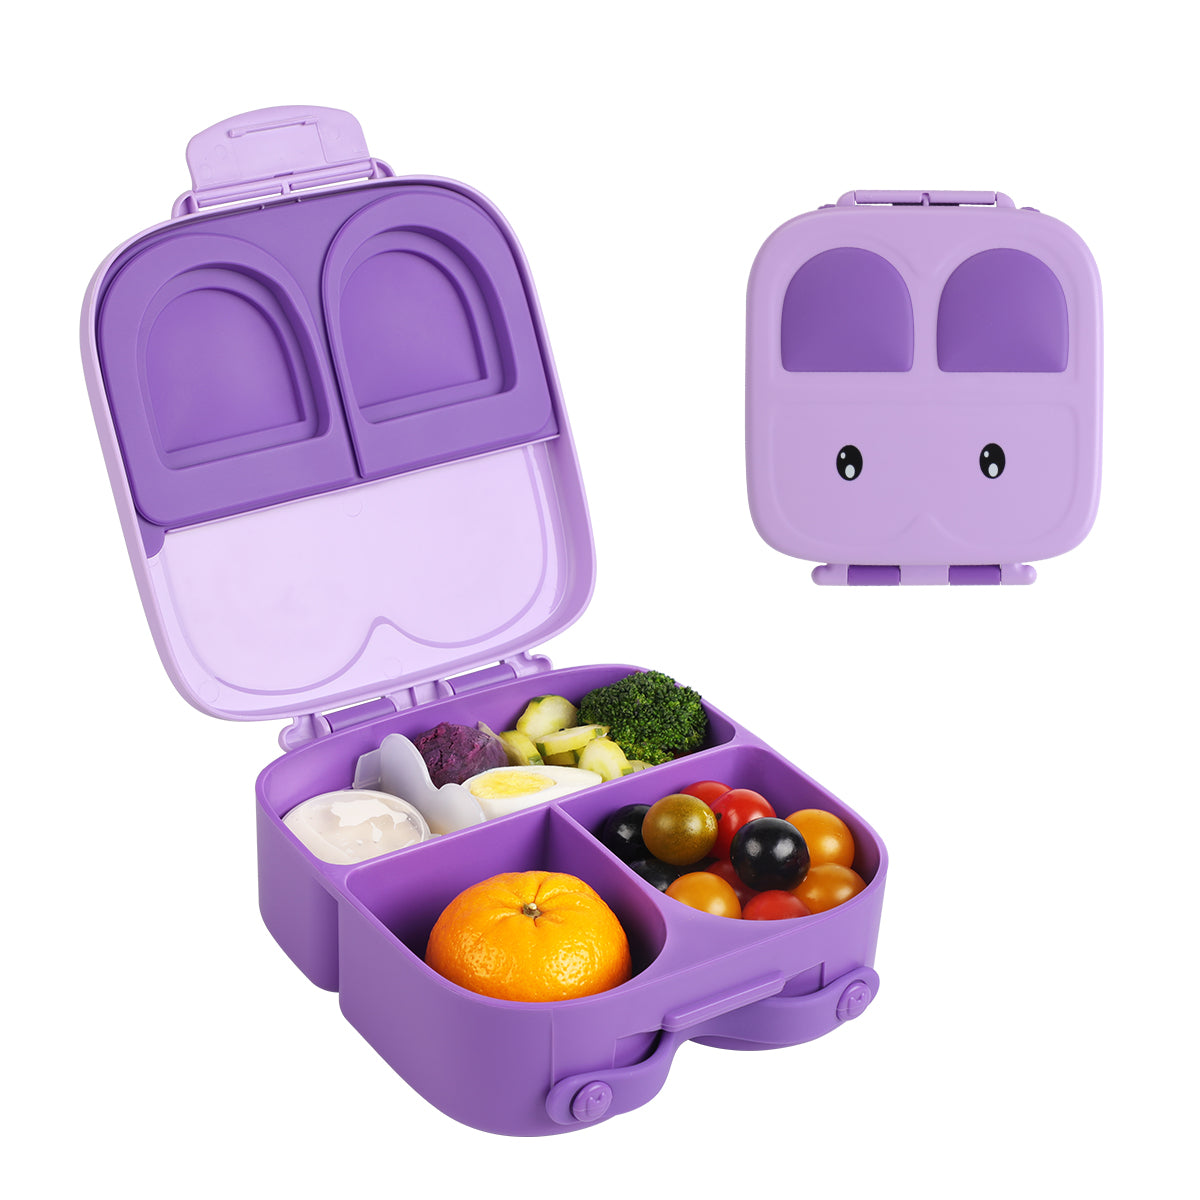 Snack Attack TM Lunch Box Bento style Bunny Shape Purple Color for Kid –